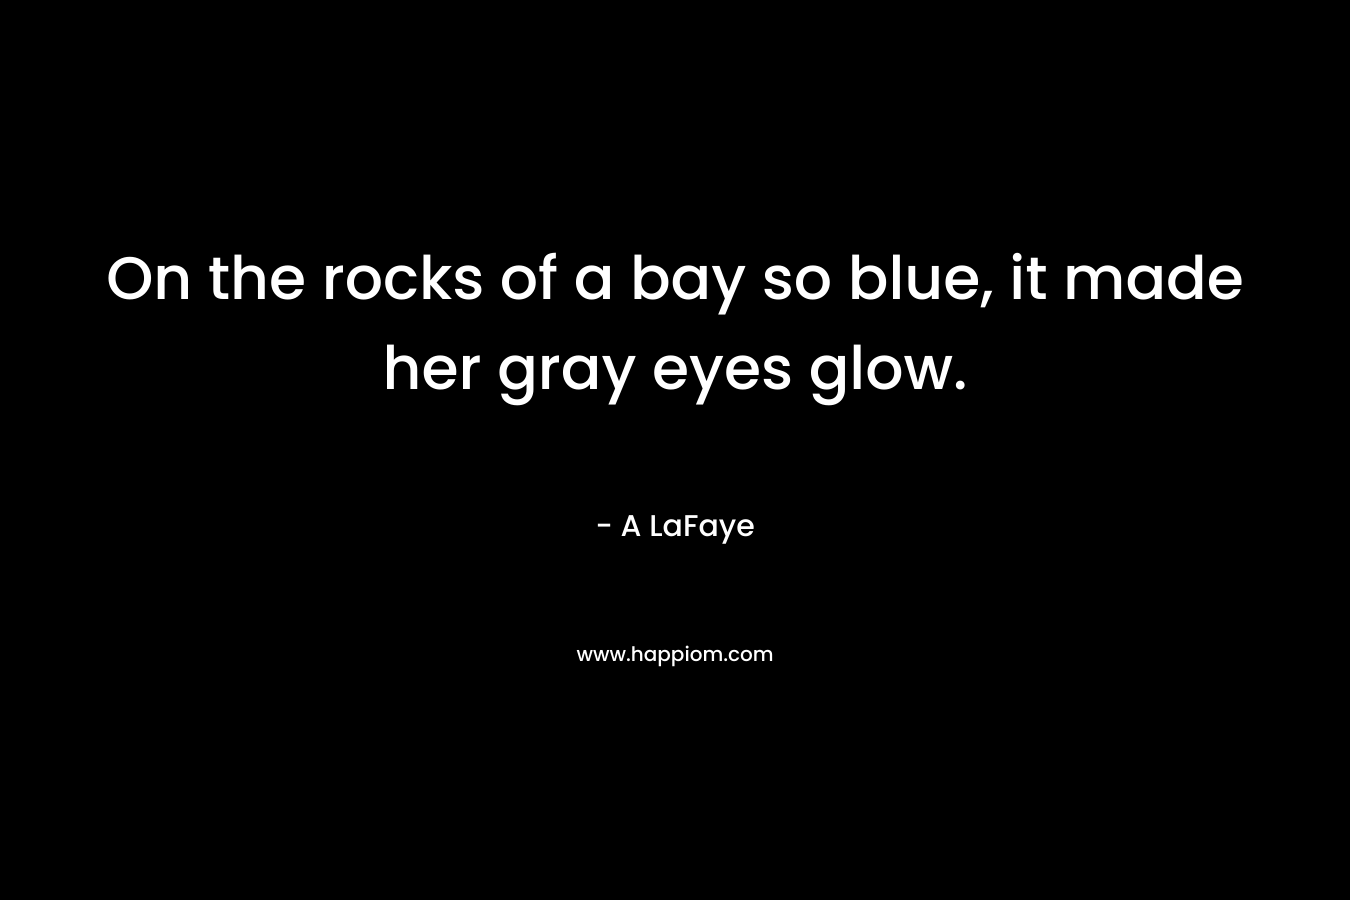 On the rocks of a bay so blue, it made her gray eyes glow.